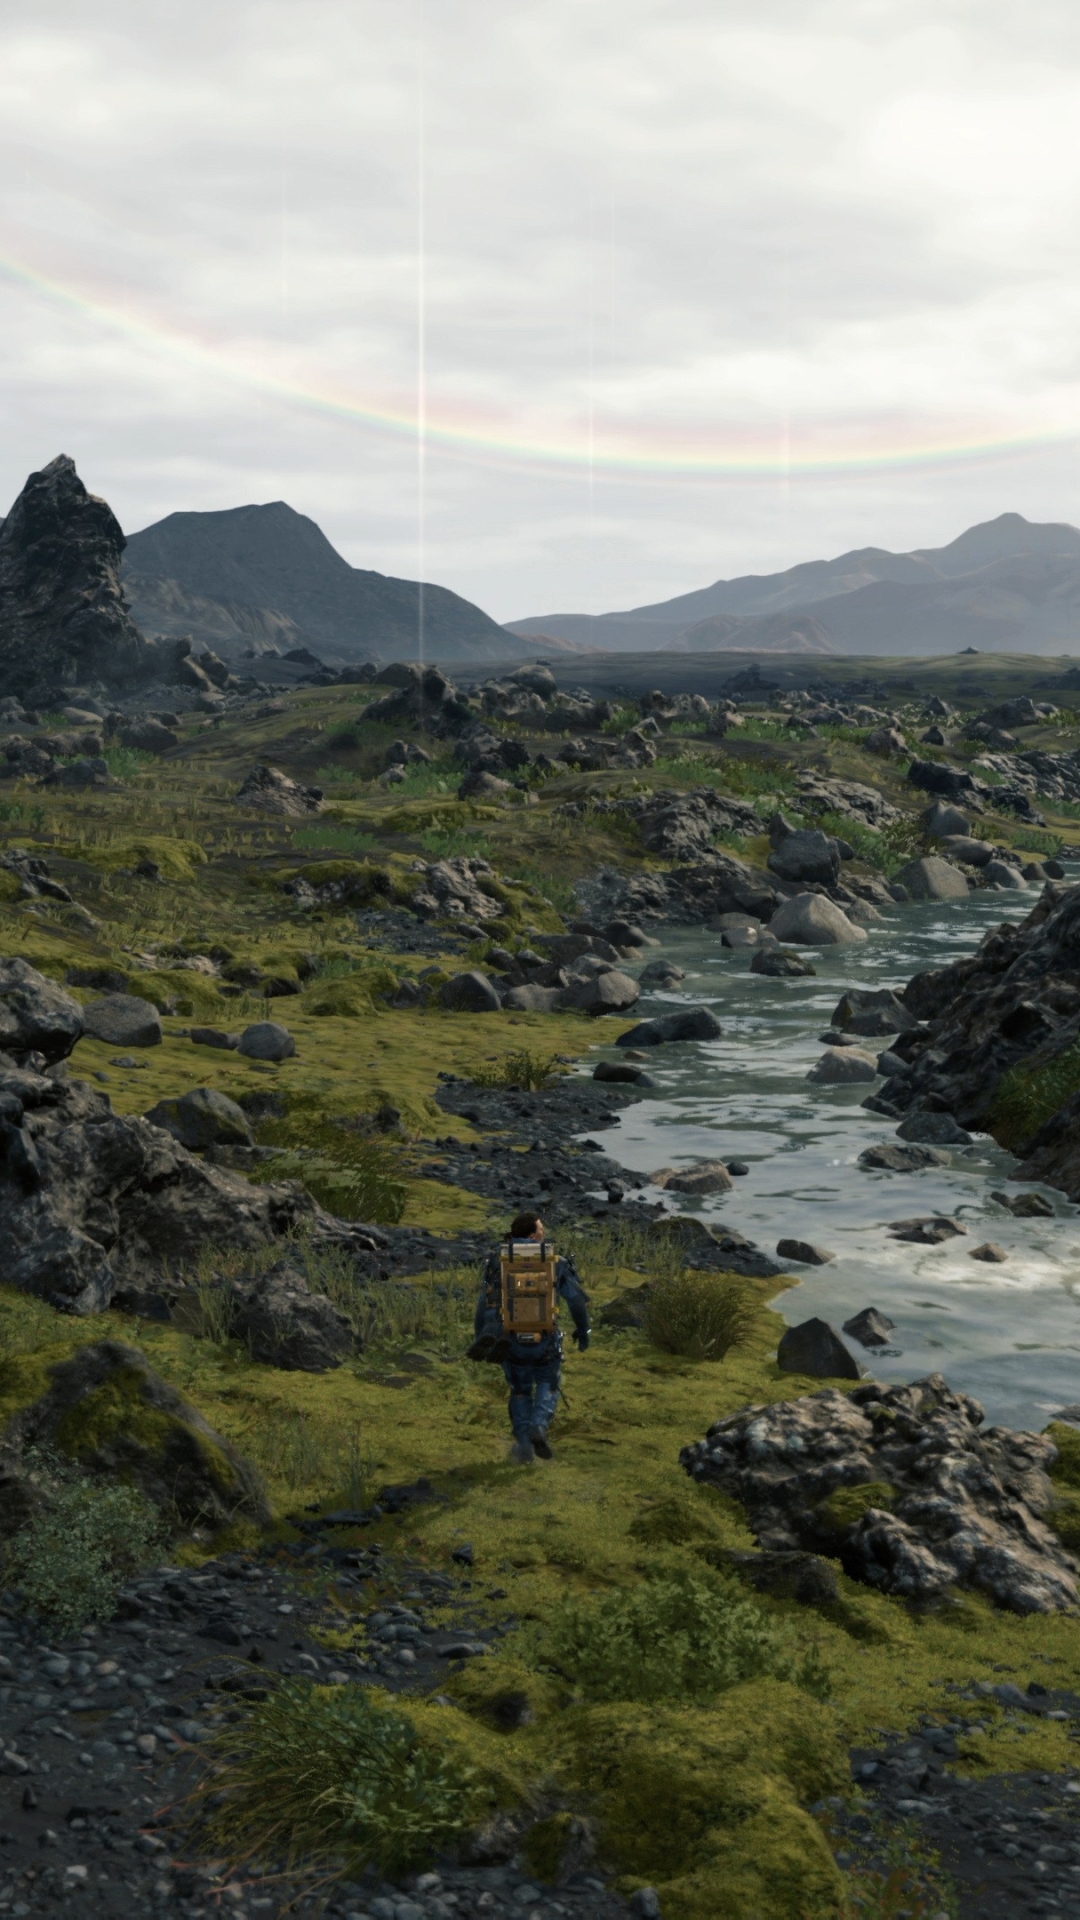 Download mobile wallpaper Video Game, Death Stranding for free.